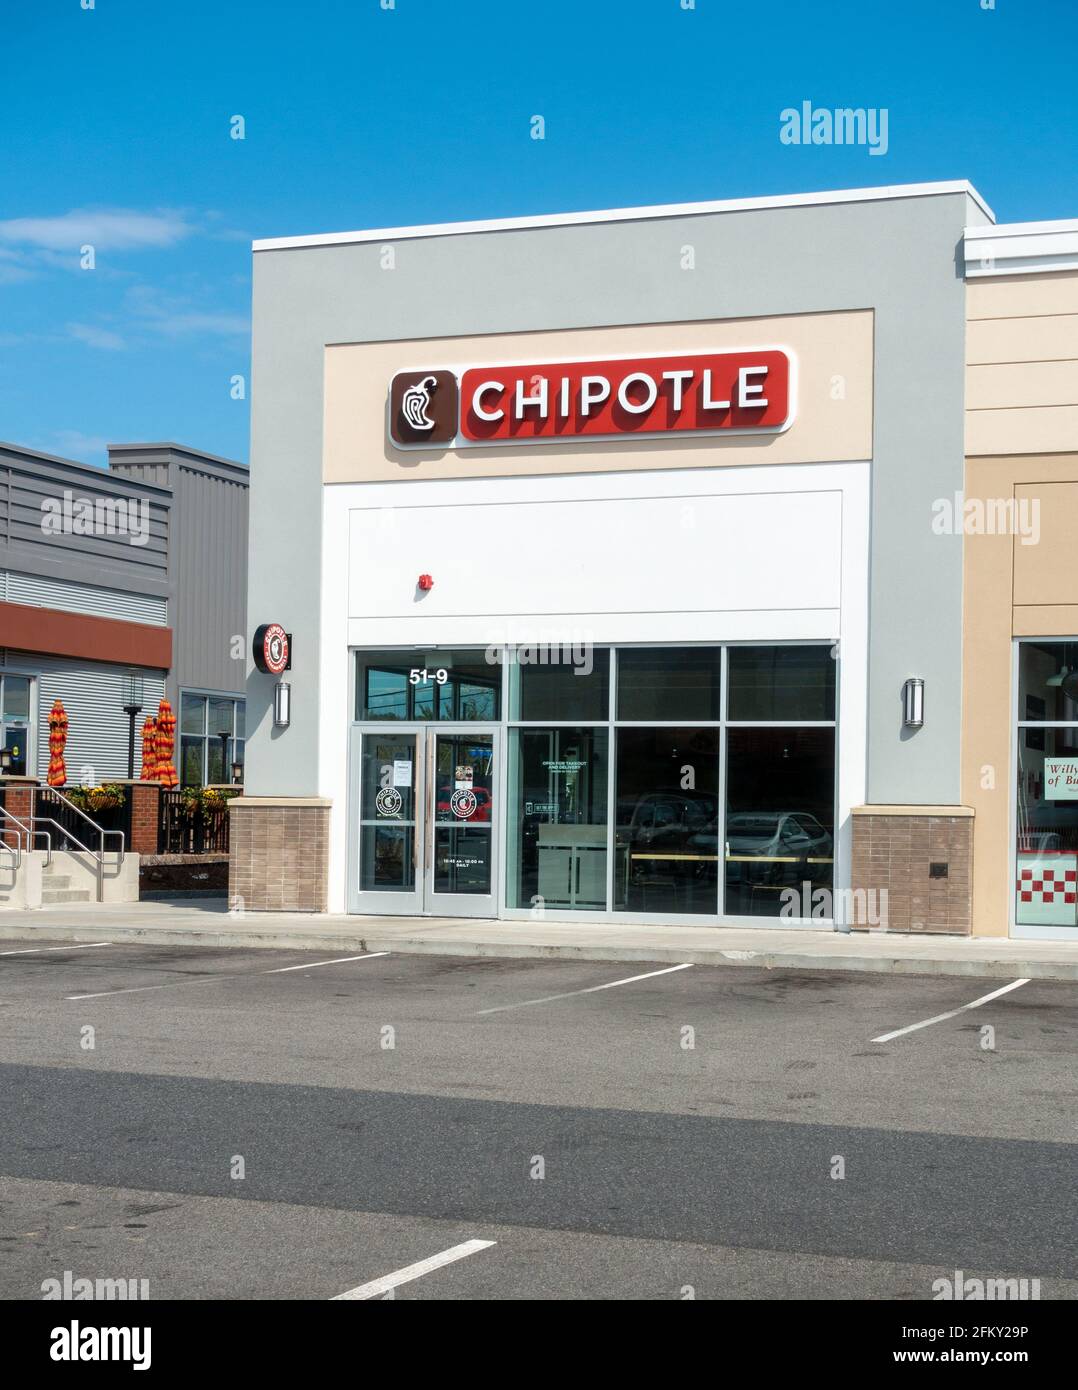 Chipotle Restaurant Storefront in Shopping Area, Plymouth, Massachusetts USA Stock Photo